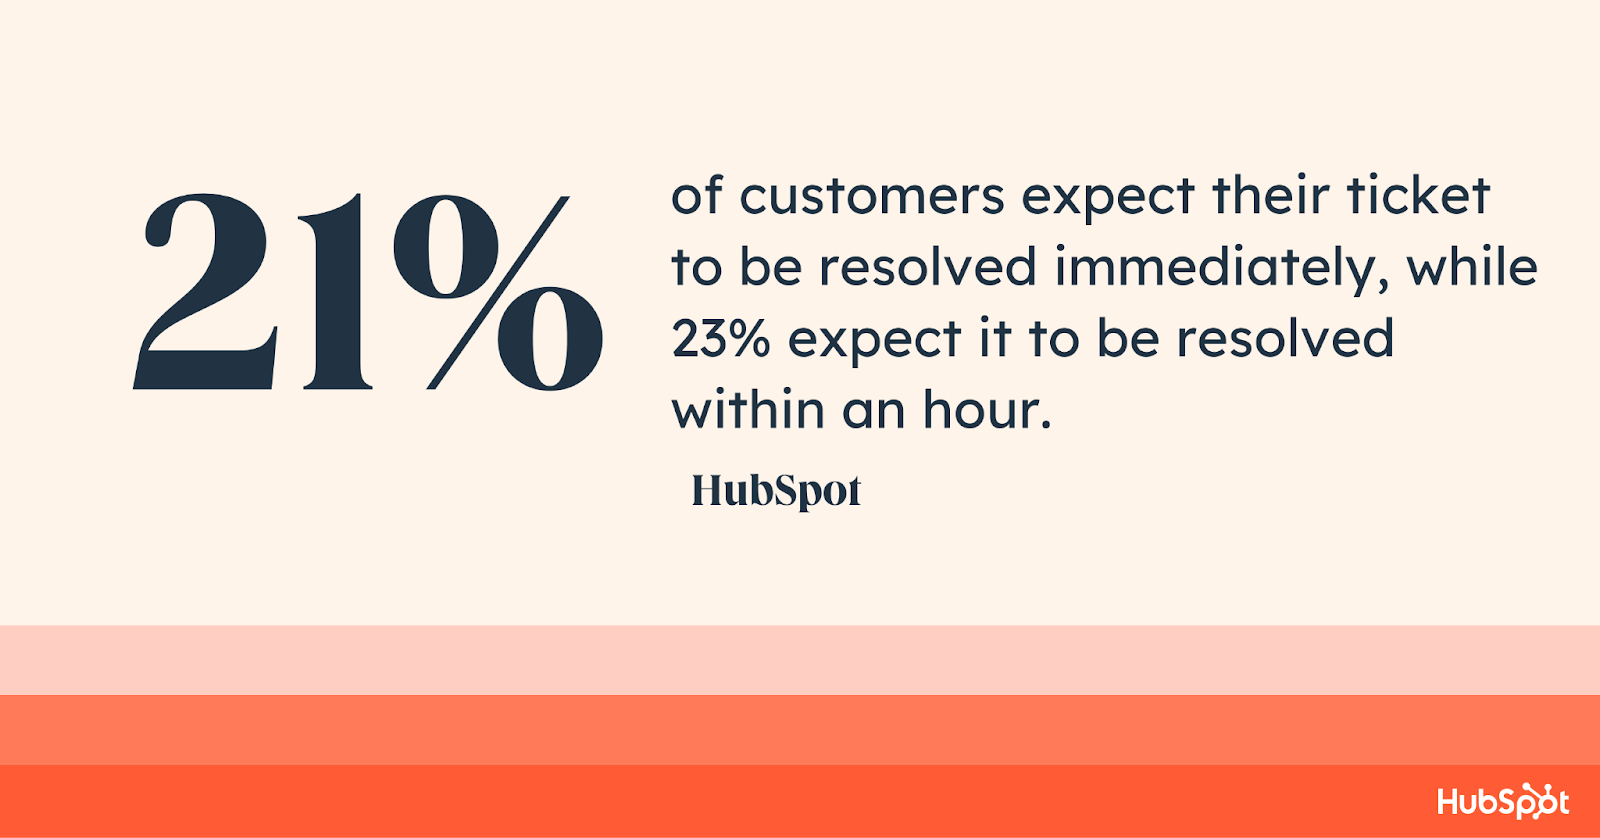 customer service statistics, 21% of customers expect their ticket to be resolved immediately, while 23% expect it to be resolved within an hour. Another 23% of customers expect resolution within one to three hours.